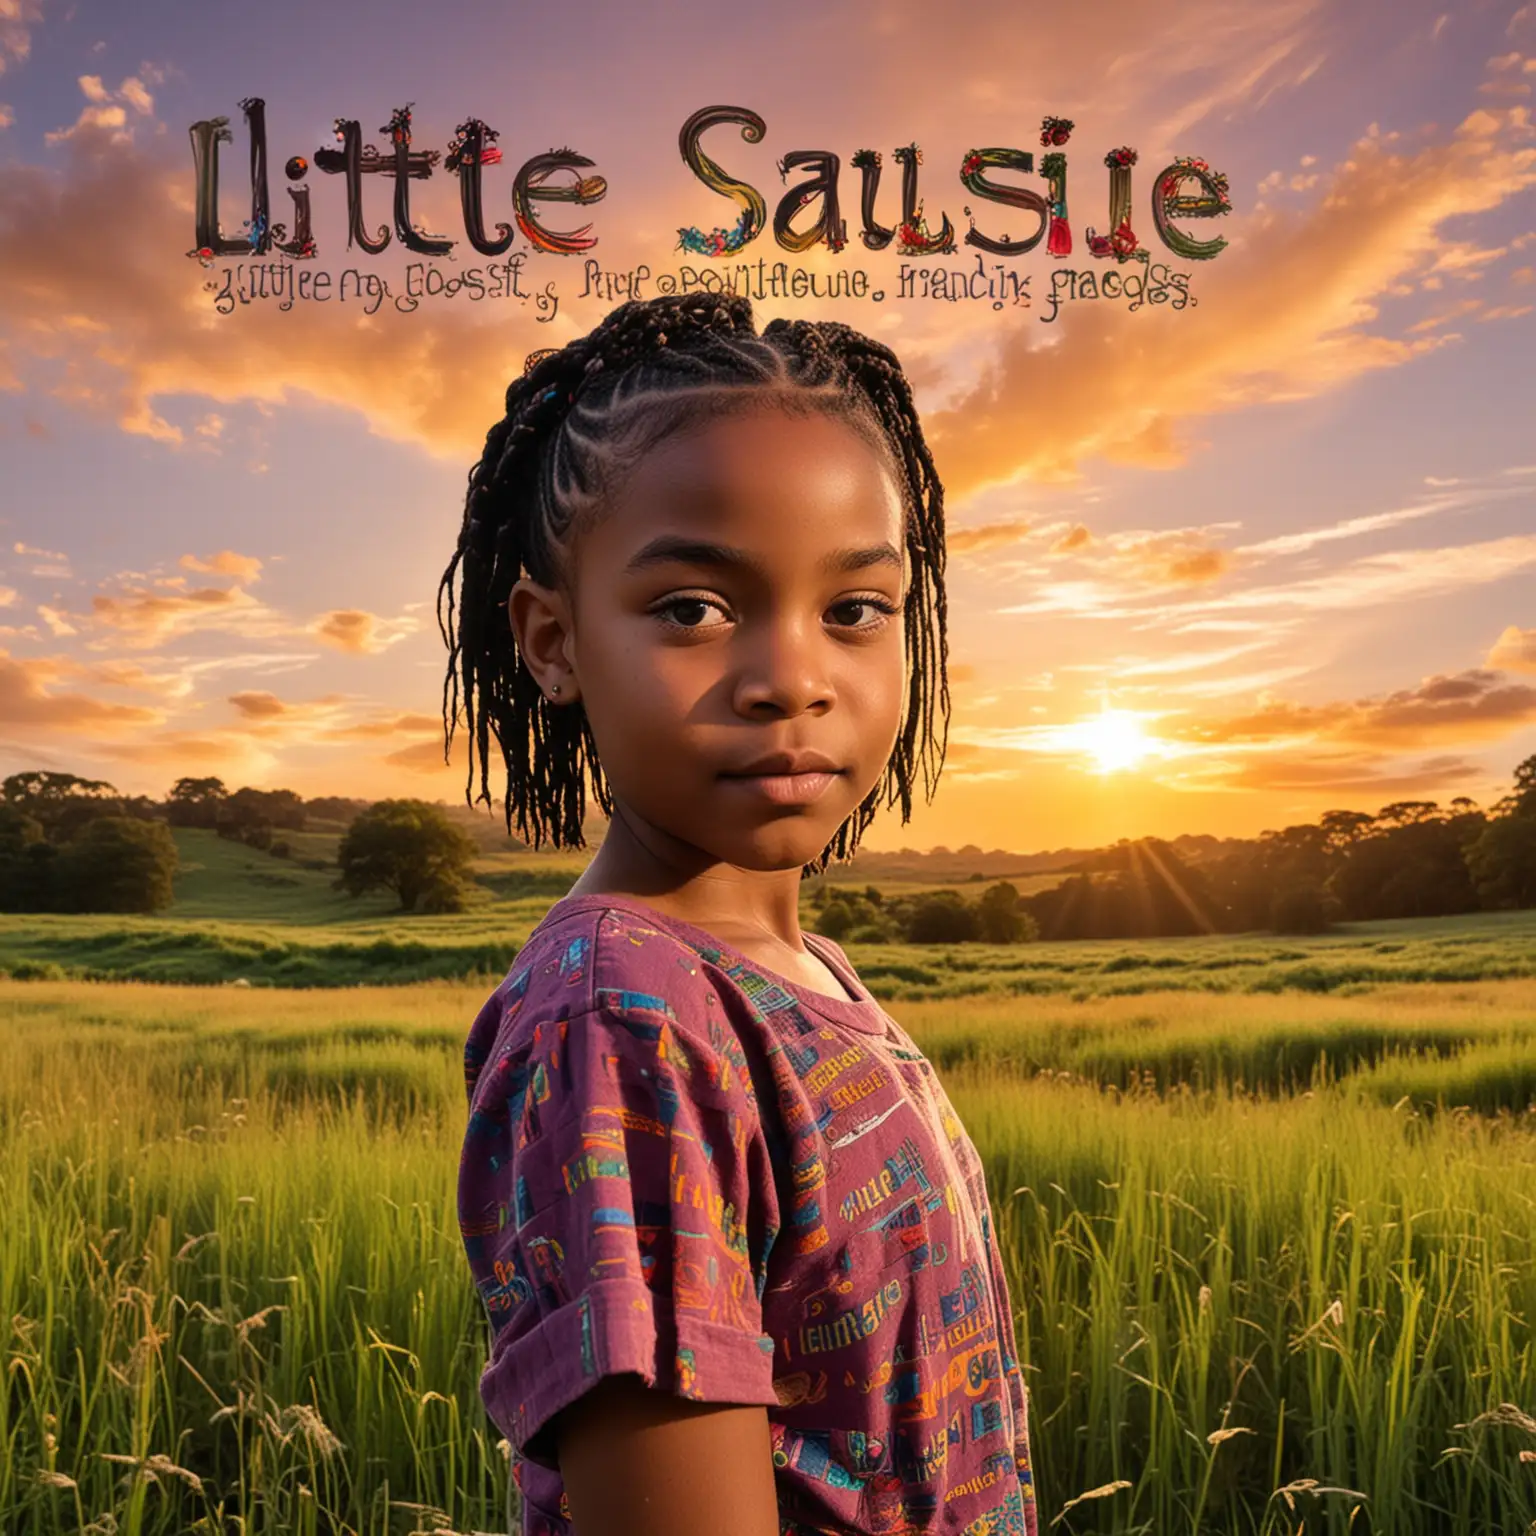 a young black girl child with short braids standing in a field of beautiful  lush grass scenery with a sunset in the background with the colorful words 'Little Susie' above her head